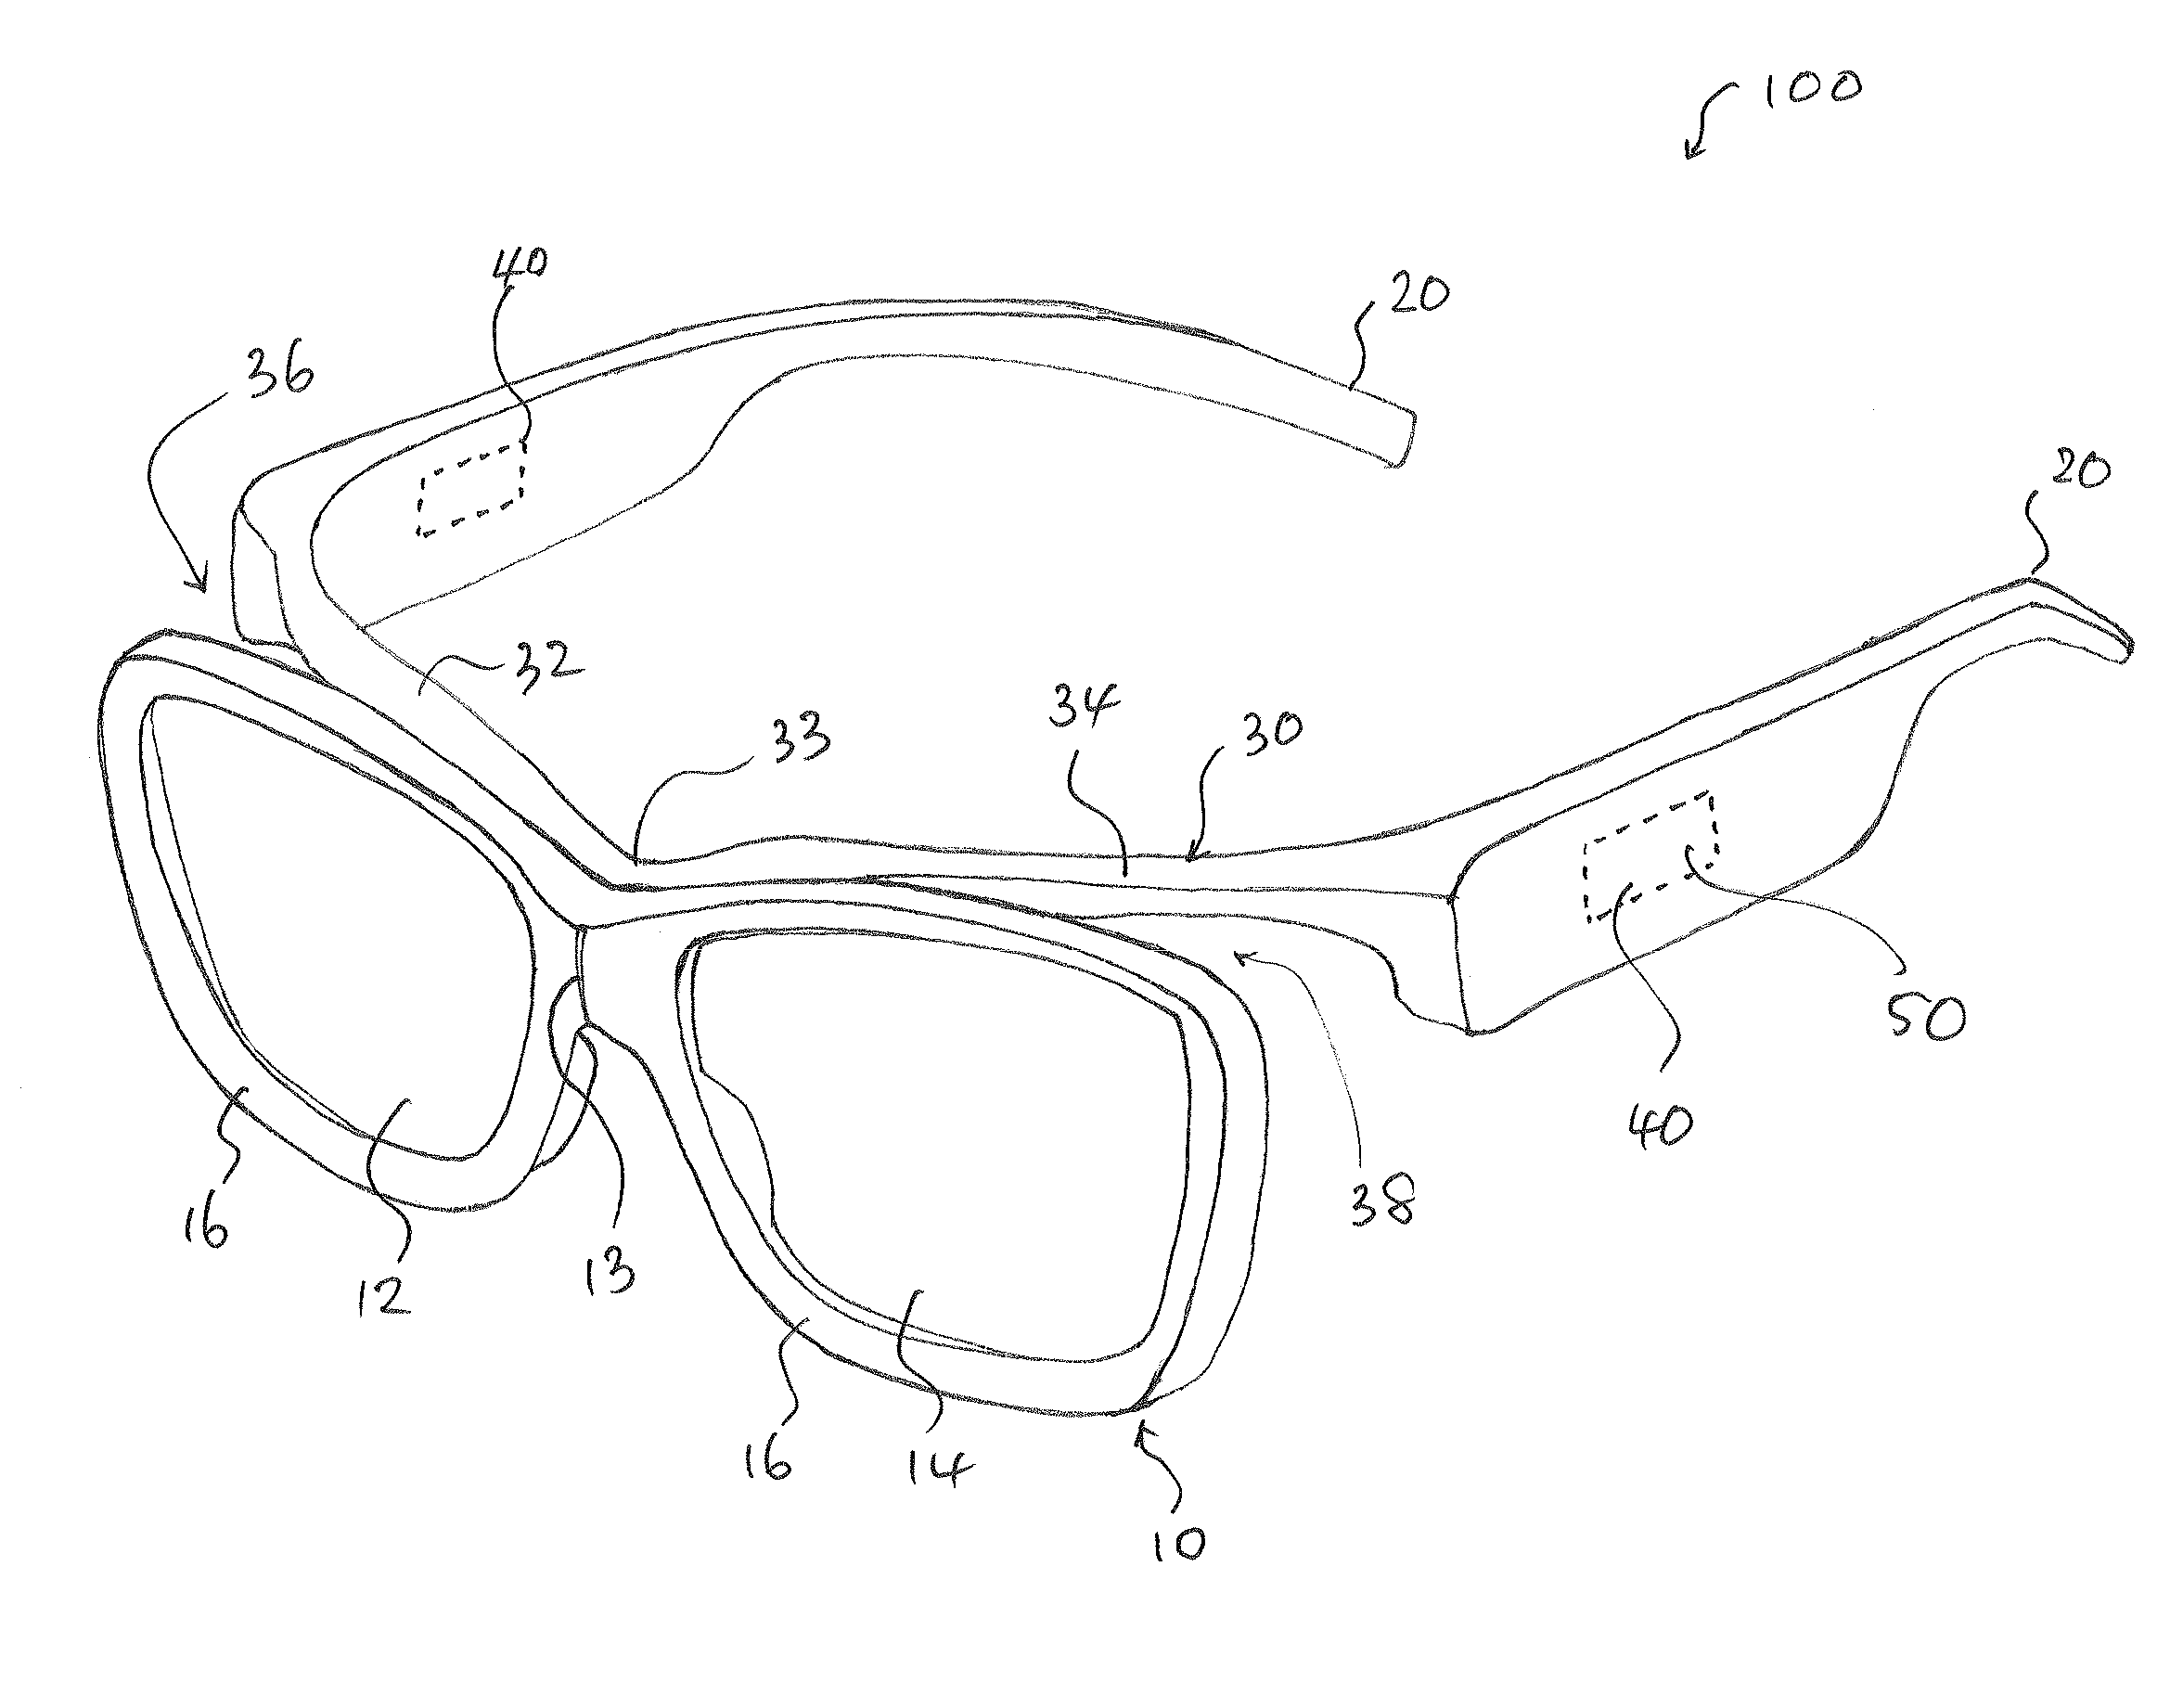 Reusable 3D Glasses Embedded with RFID and RF-EAS Tags for use at 3D Movie Theatres